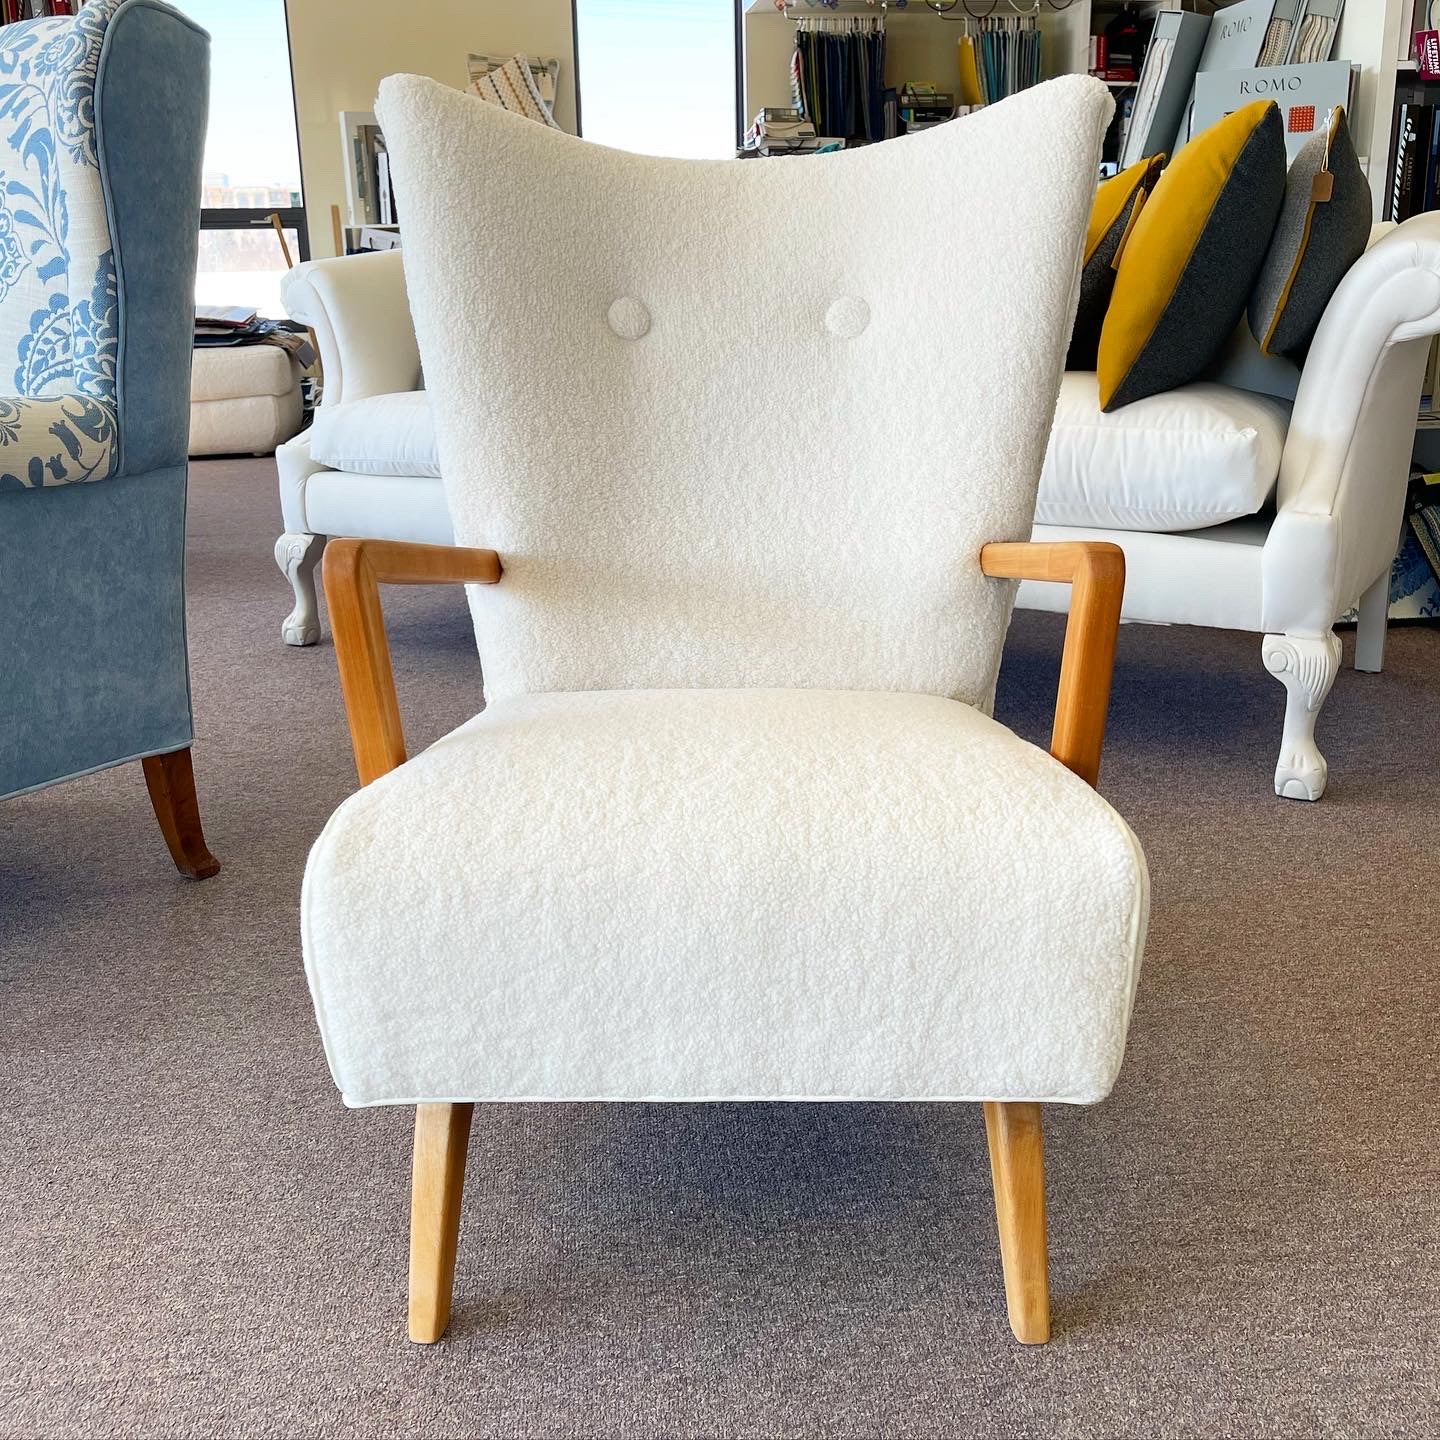 1960’s/70’s mid century modern solid ash and maple wood chair.